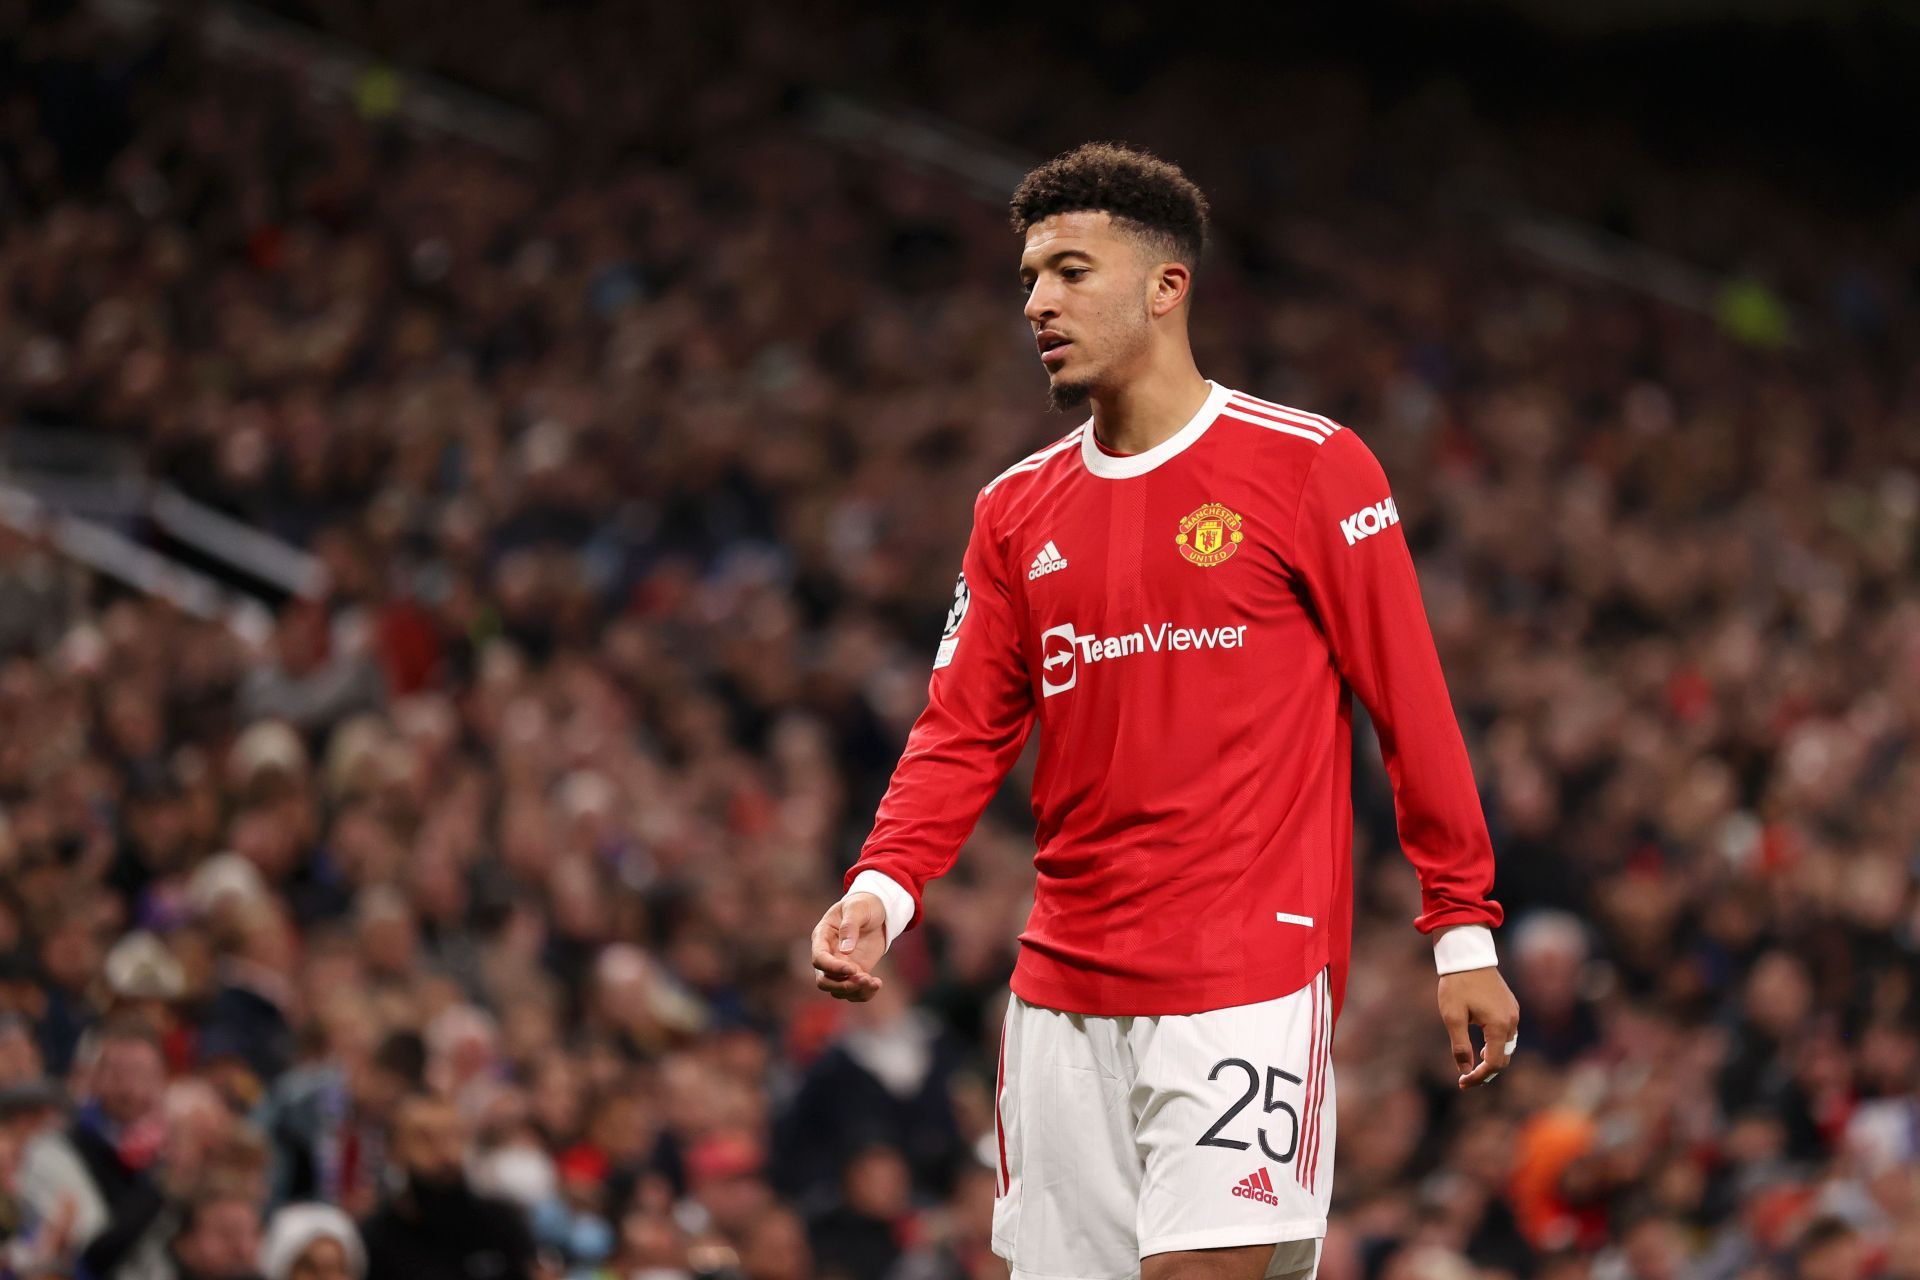 Jadon Sancho is struggling with his form at Manchester United